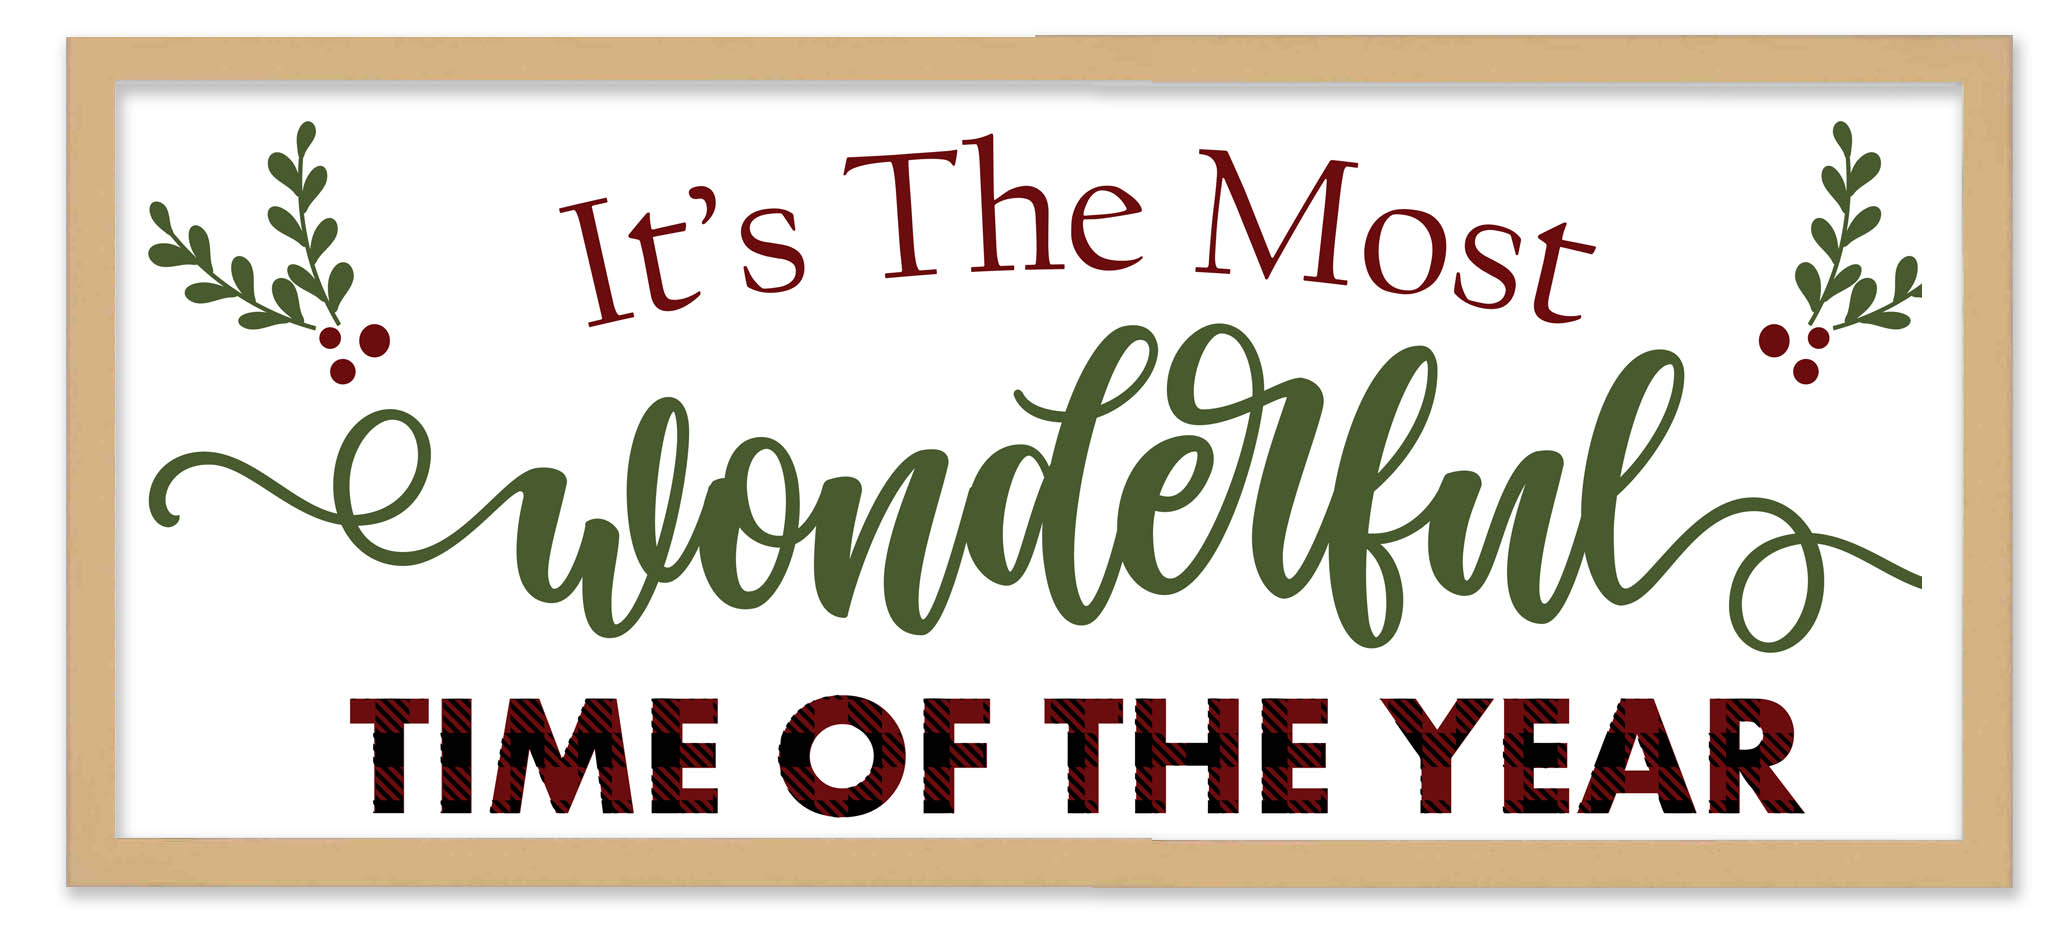 CustomPictureFrames.com Big It's The Most Wonderful Time of the Year 9.5" x 21.5" Framed Christmas Wall Decor  Sign Poster in a Natural Wooden Frame